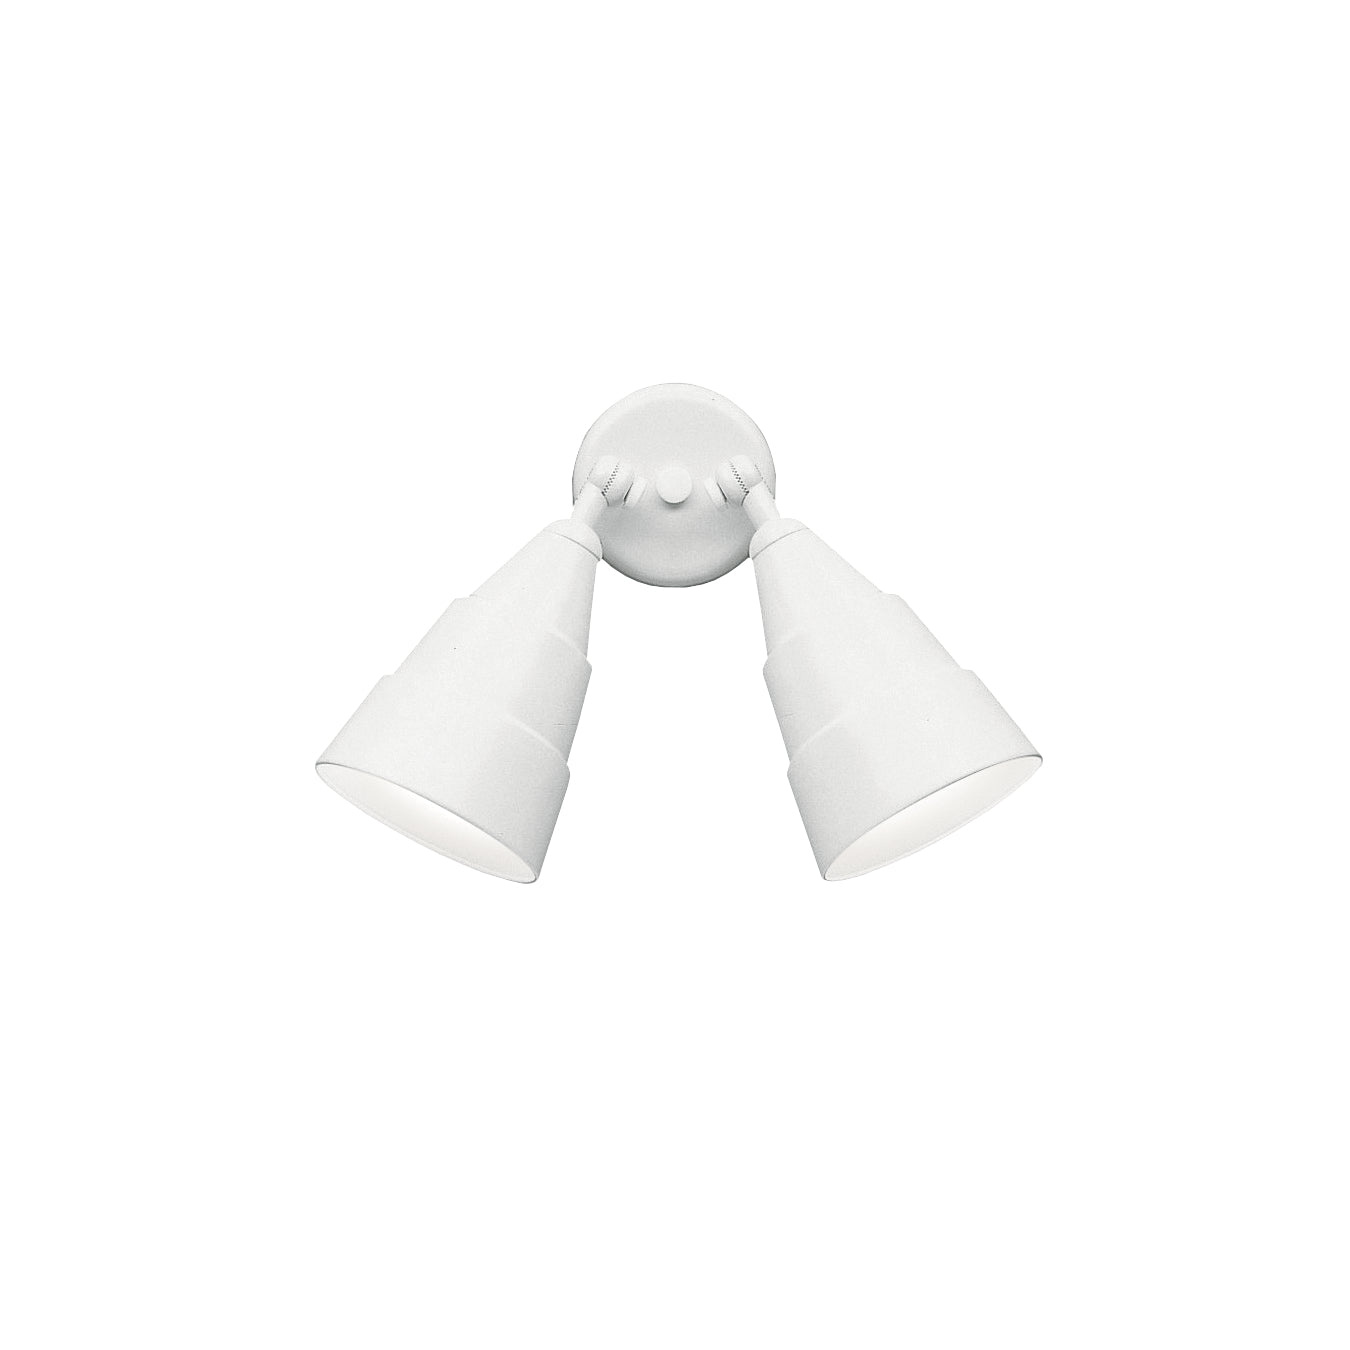 Outdoor sconce White - 6052WH | KICHLER